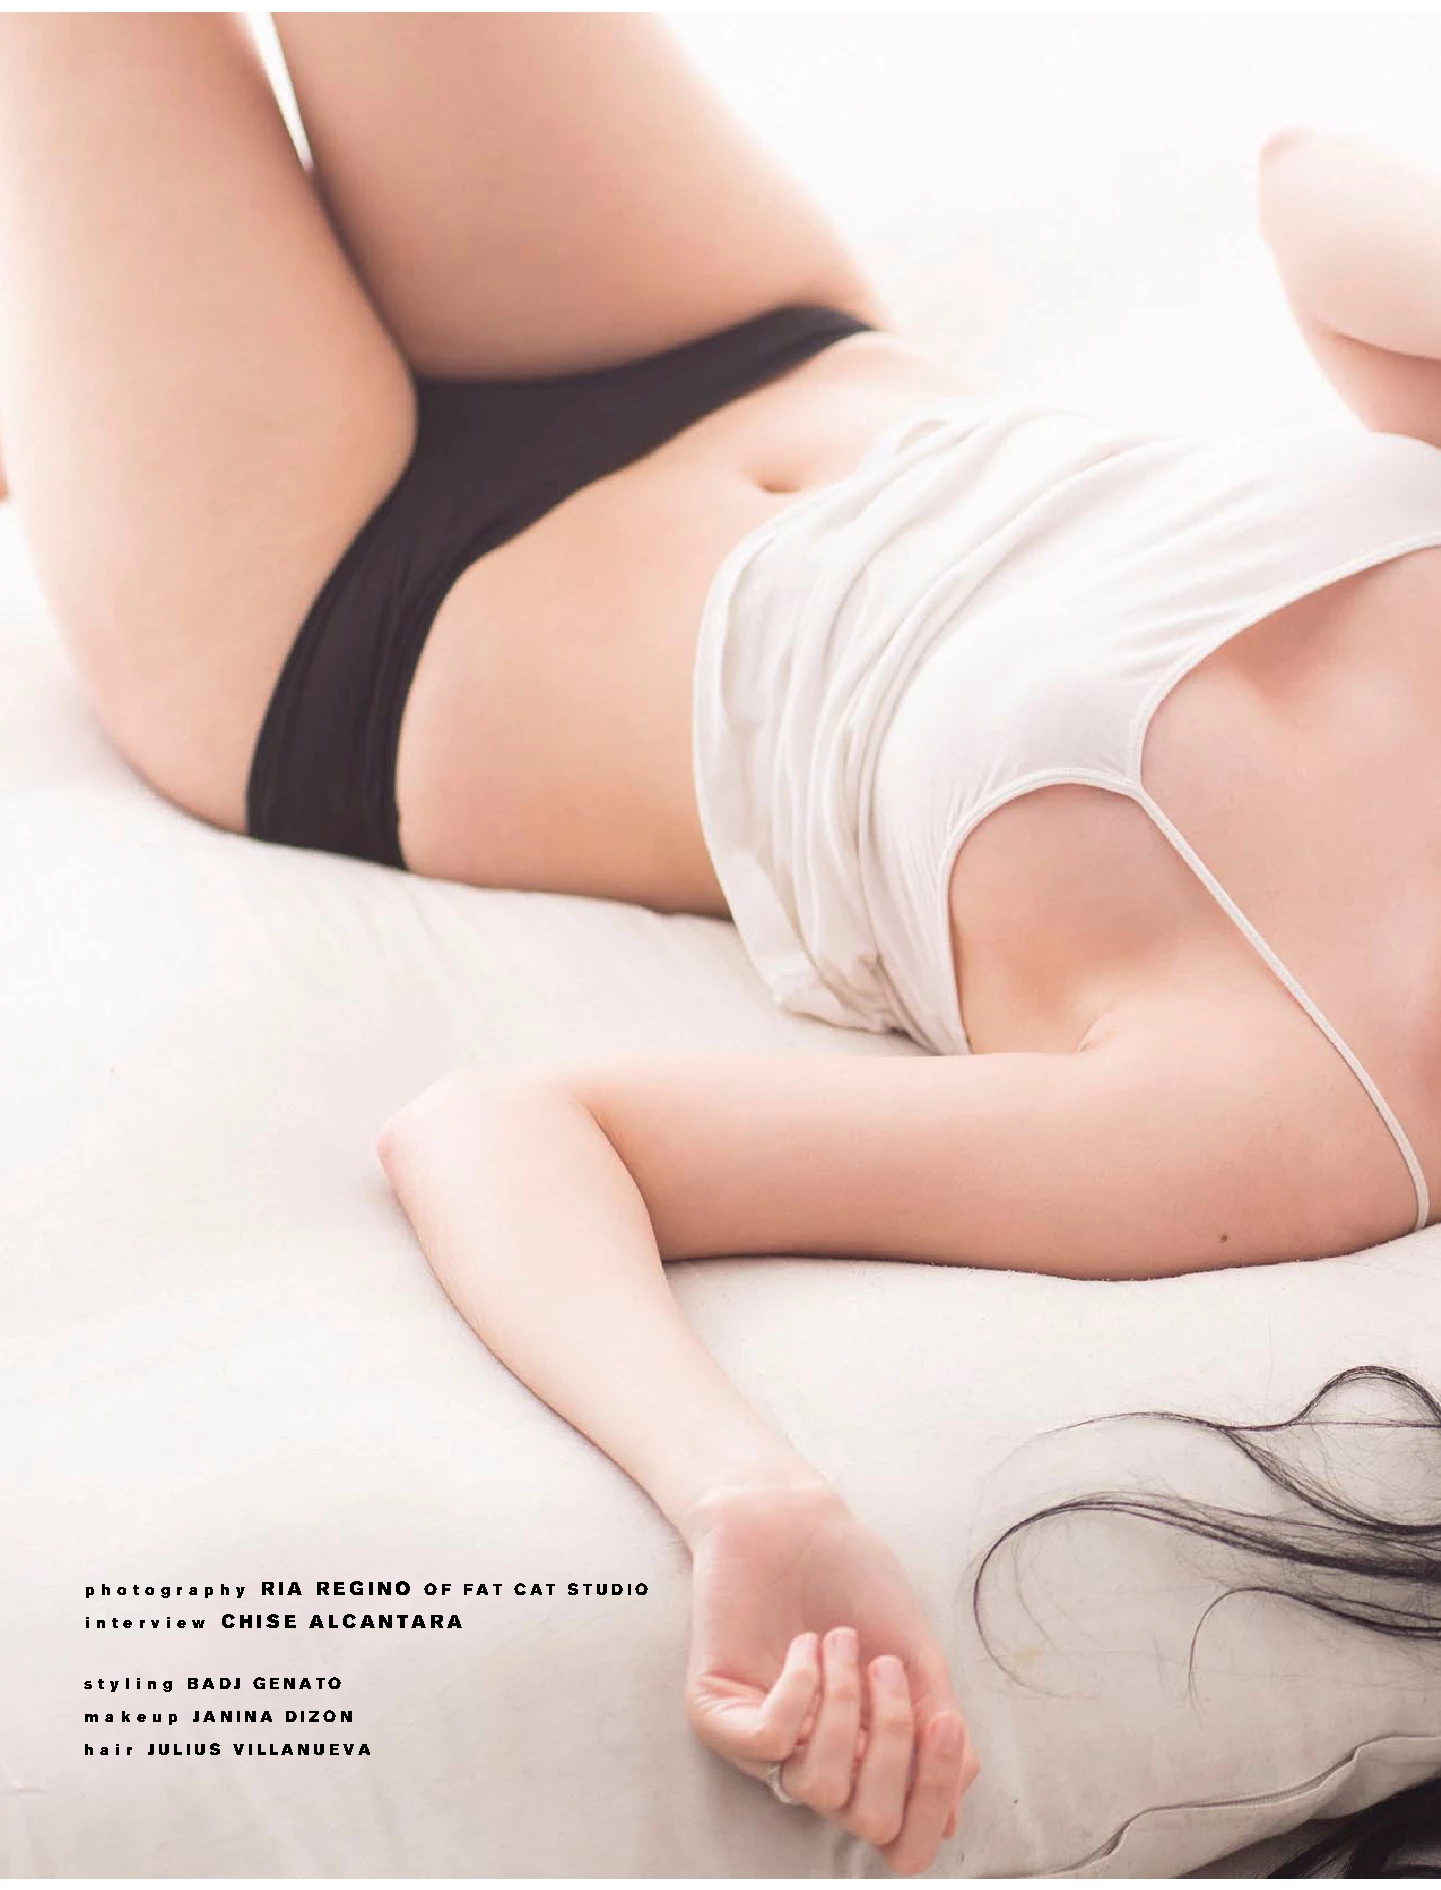 Kim Domingo is a model now on FHM Philippines cover girl for December 2015-1